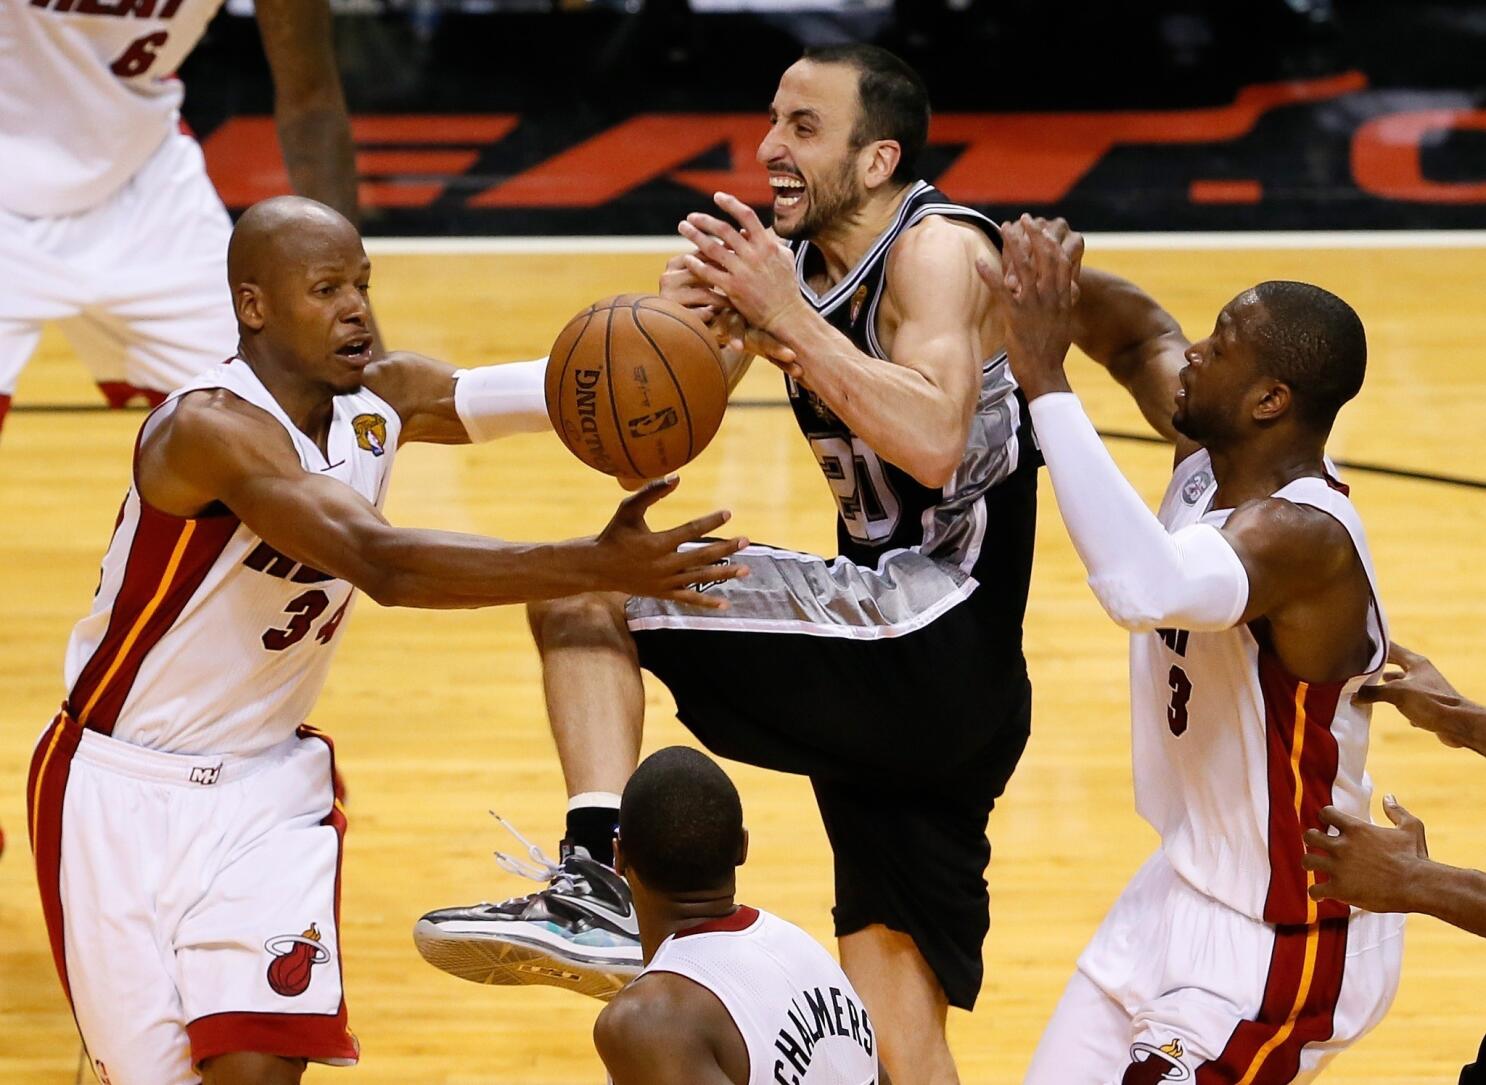 N.B.A. Finals: For Bosh, a Trip Home and a Road Back - The New